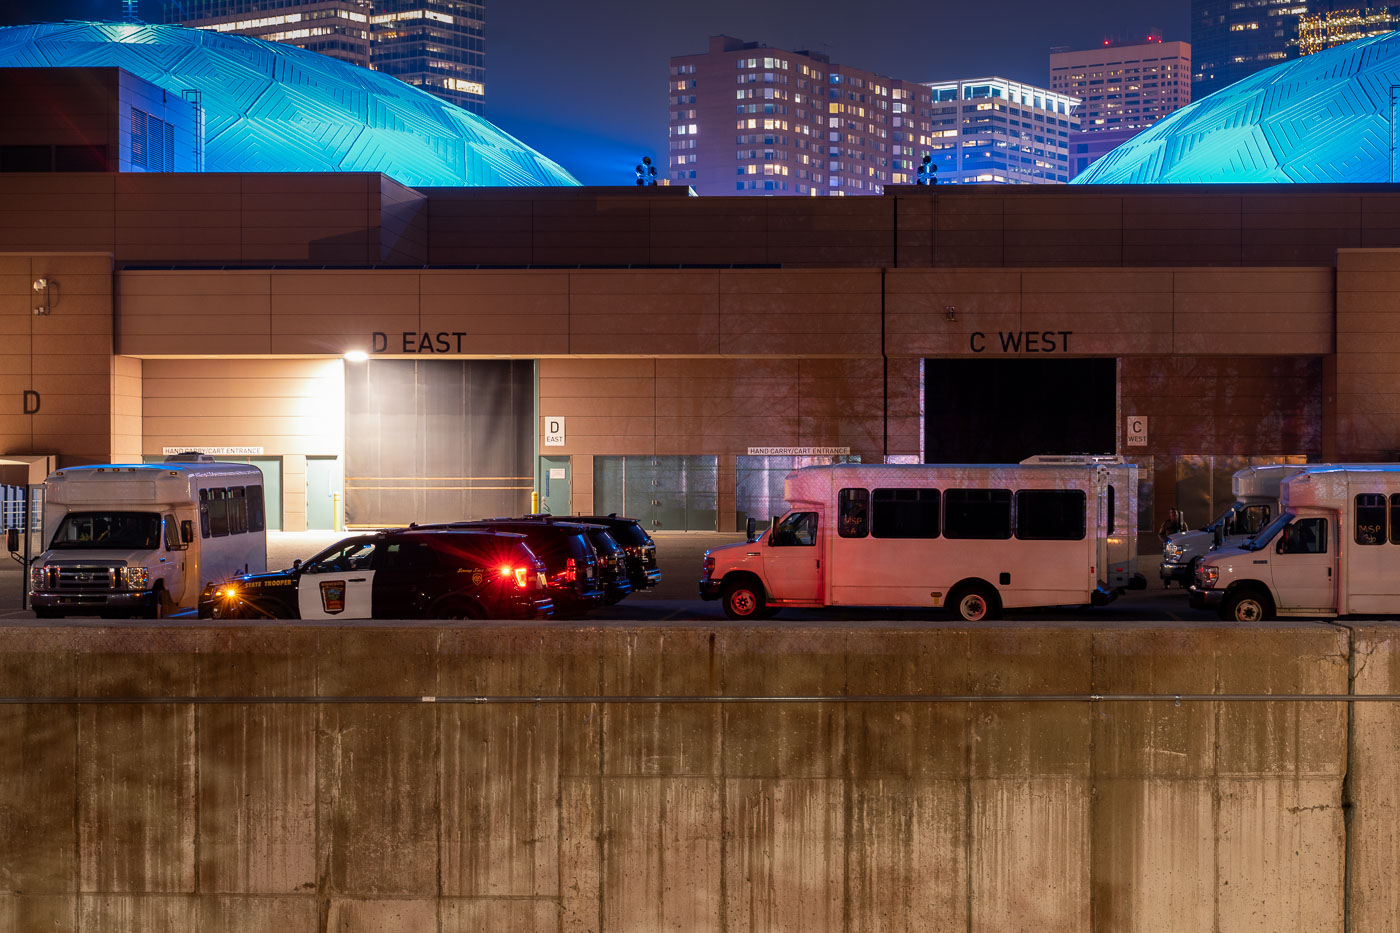 State patrol arrest buses outside convention center.